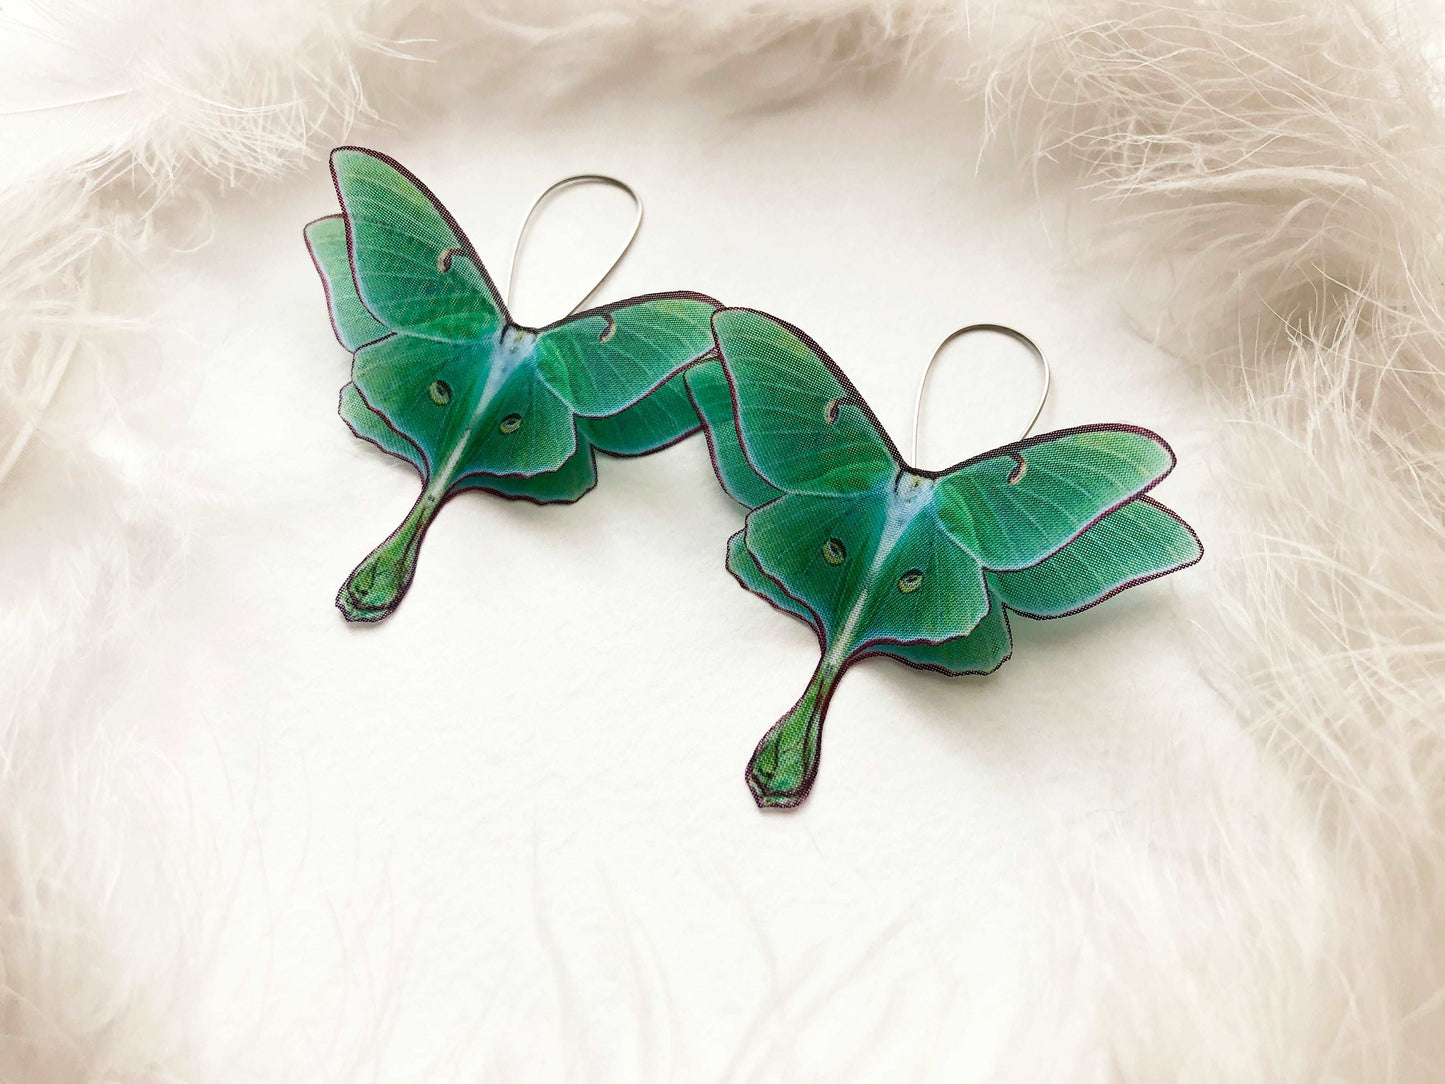 Green Luna Moth earrings with a gift box hypoallergenic sterling silver base